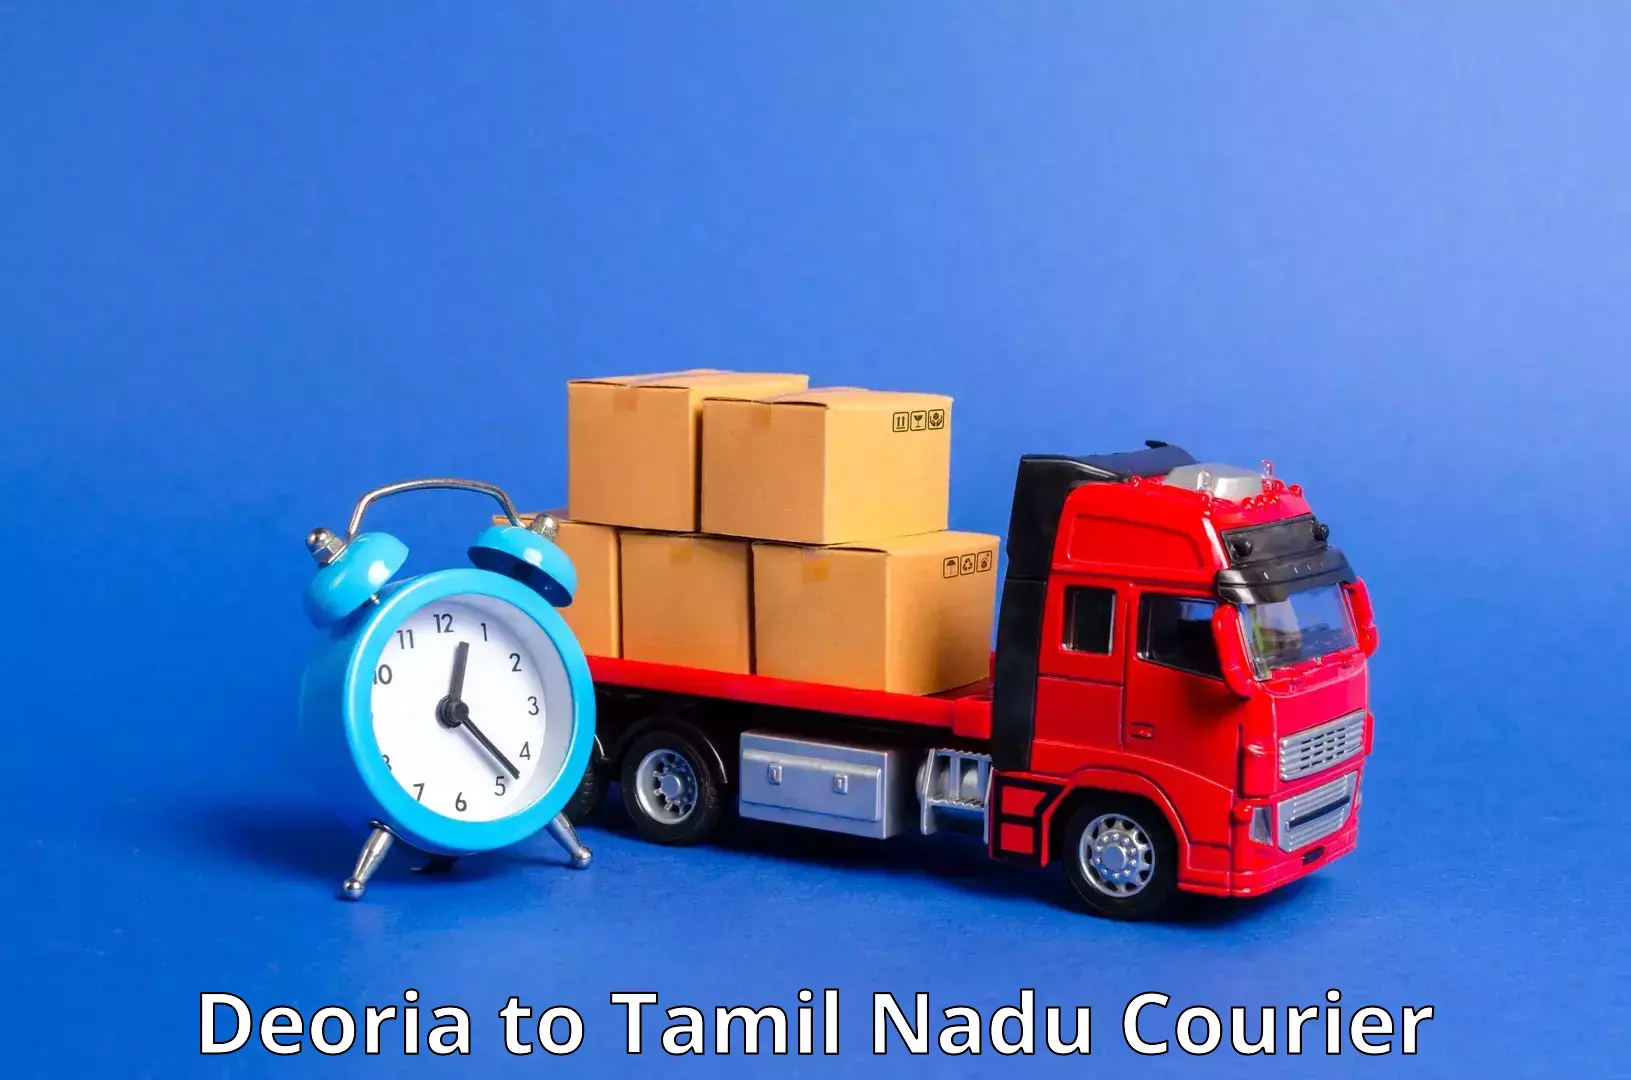 Global freight services Deoria to Shanmugha Arts Science Technology and Research Academy Thanjavur